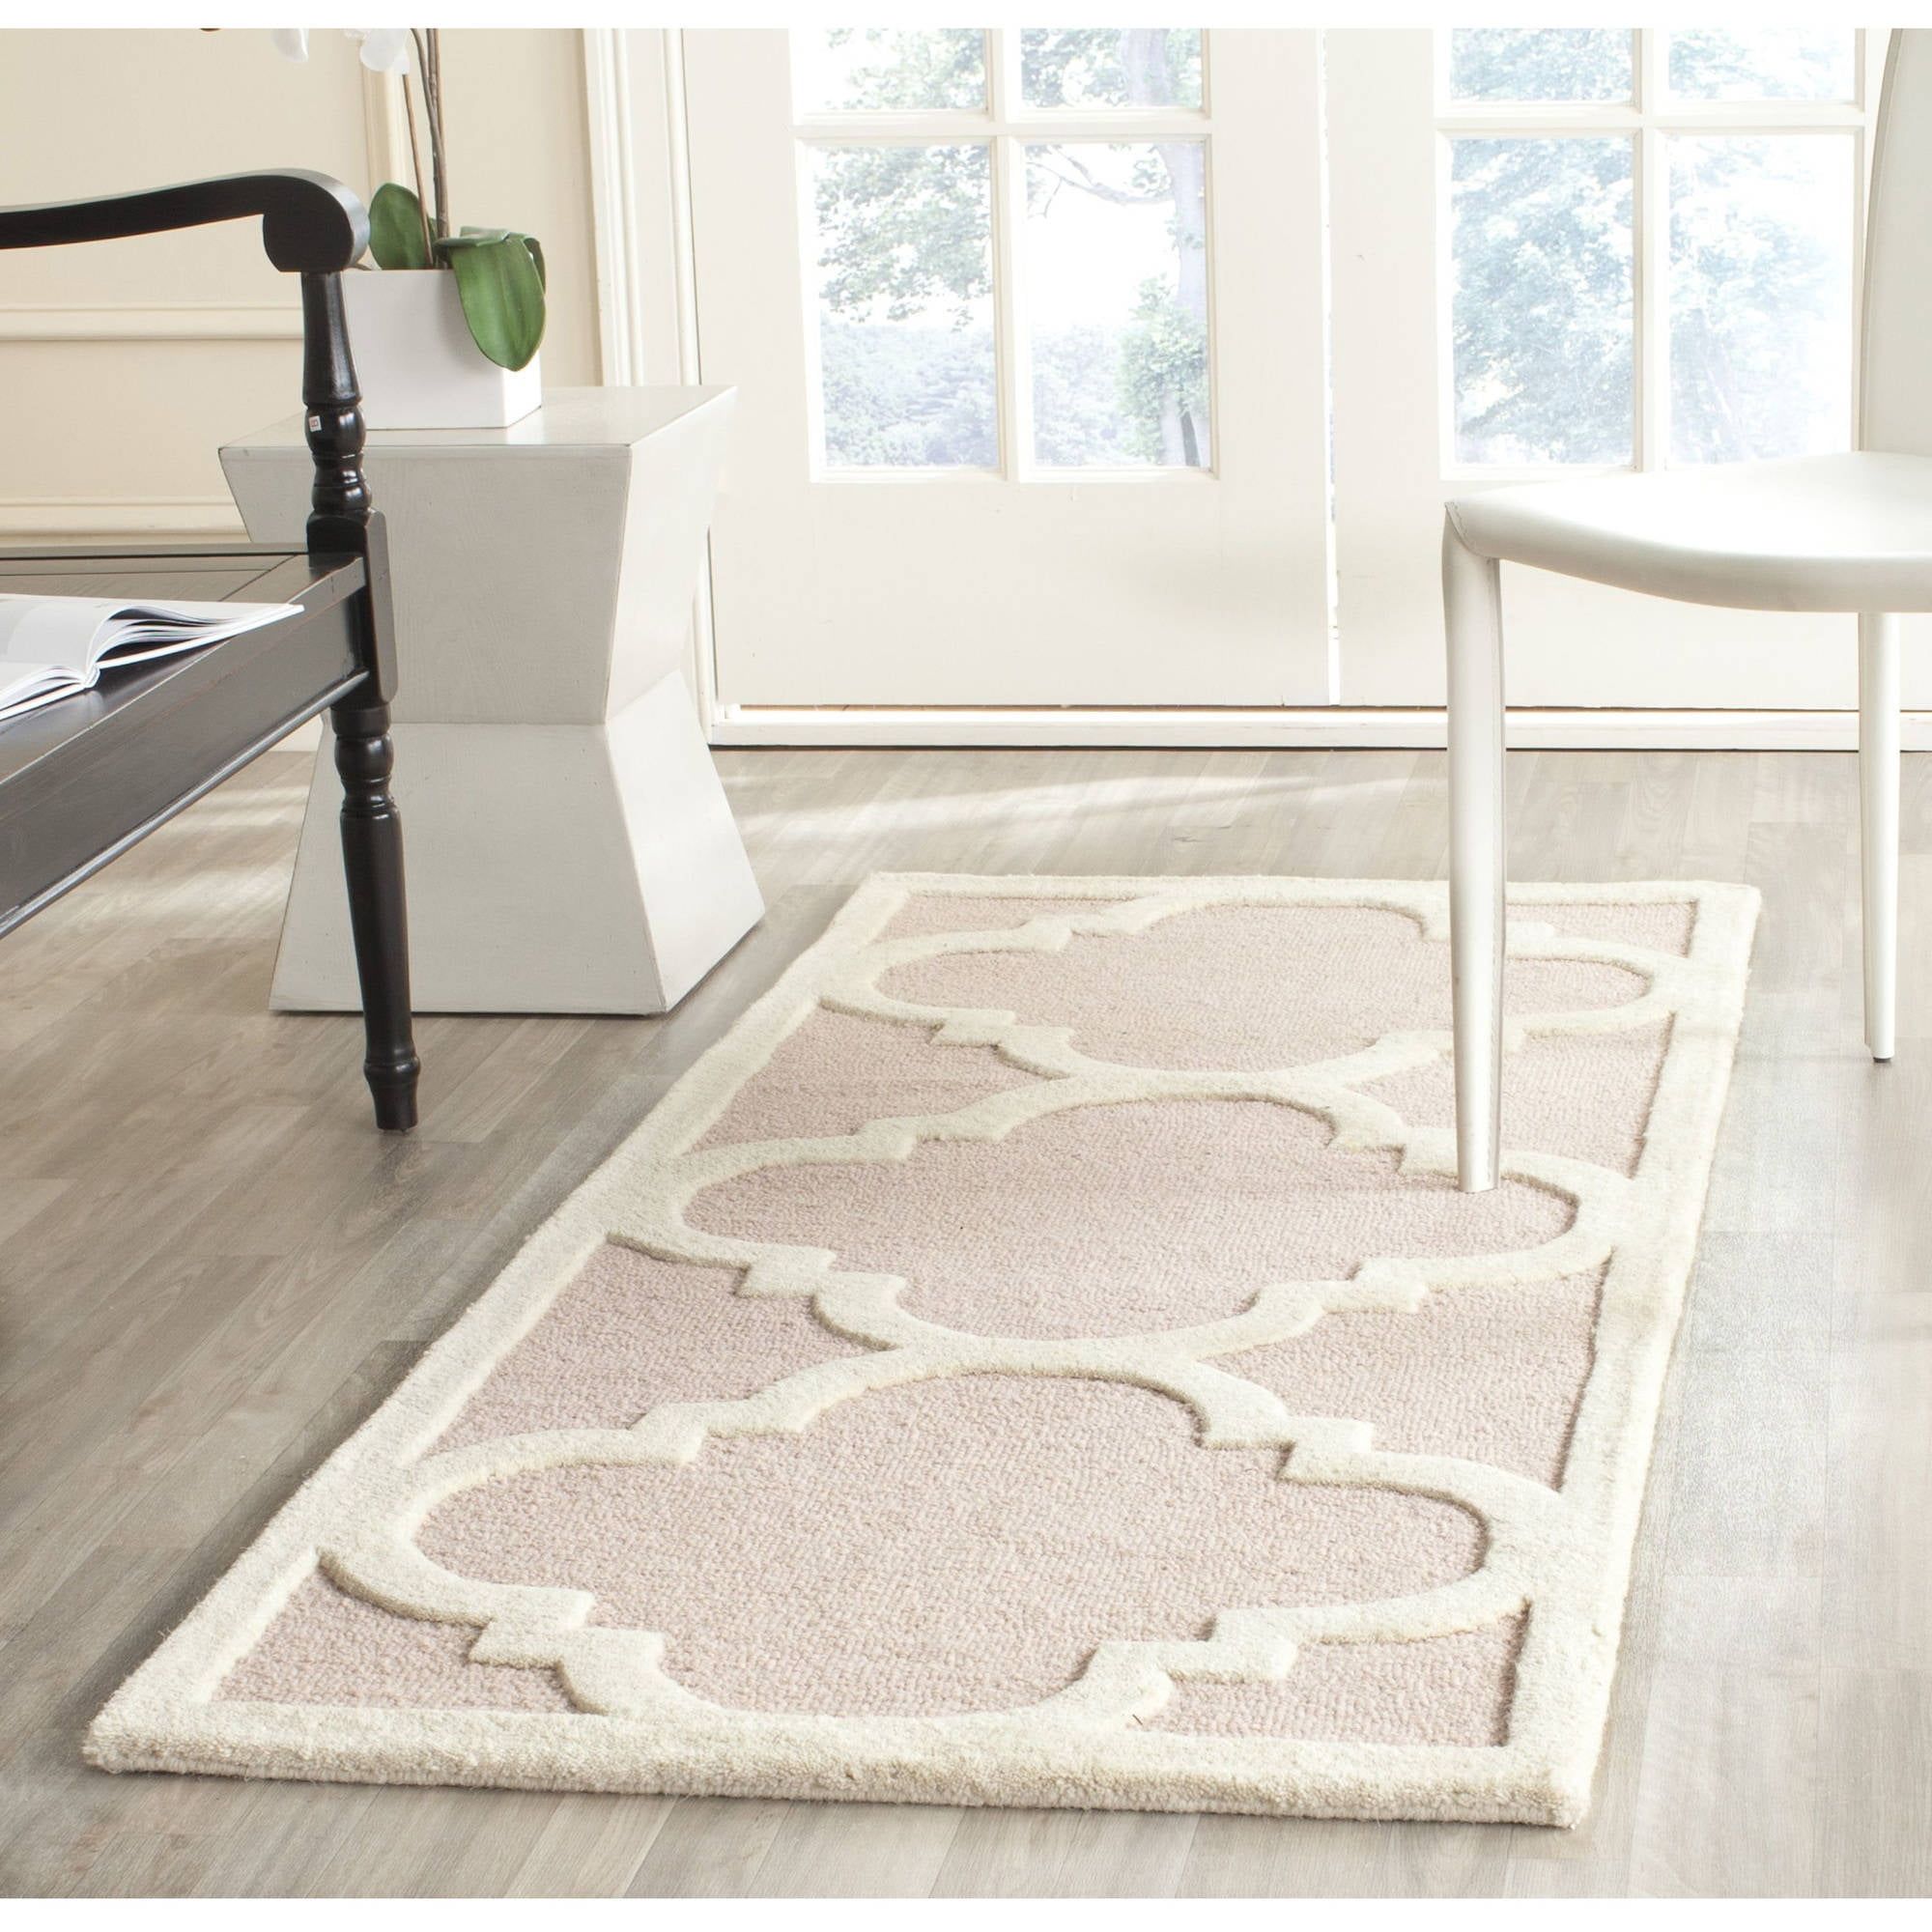 Charming Light Pink and Ivory Hand-Tufted Wool Runner Rug, 2'6" x 6'